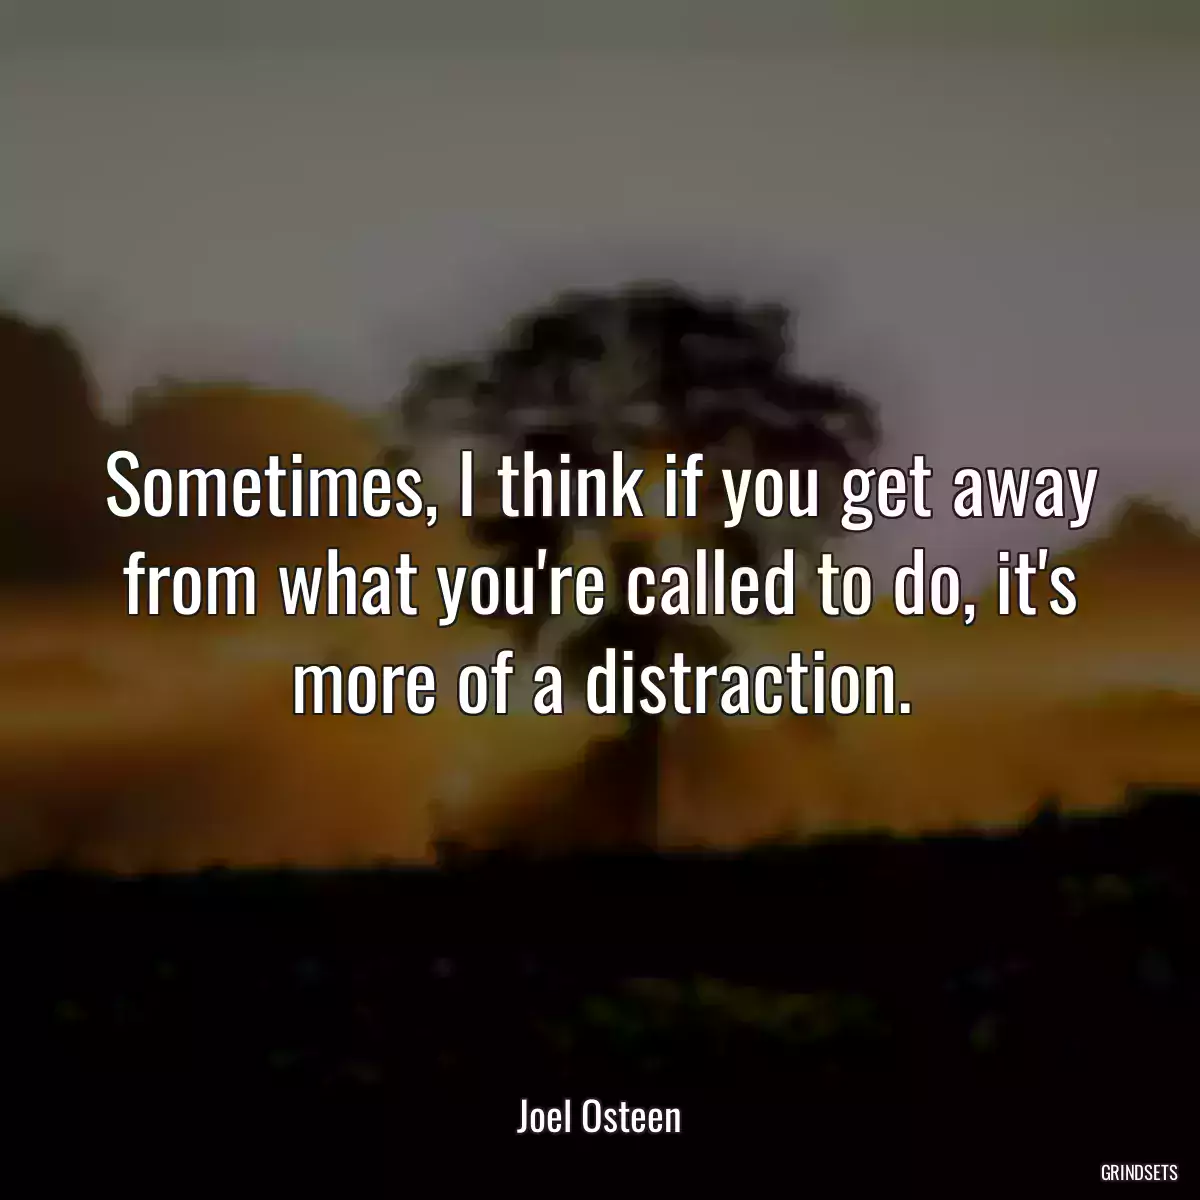 Sometimes, I think if you get away from what you\'re called to do, it\'s more of a distraction.